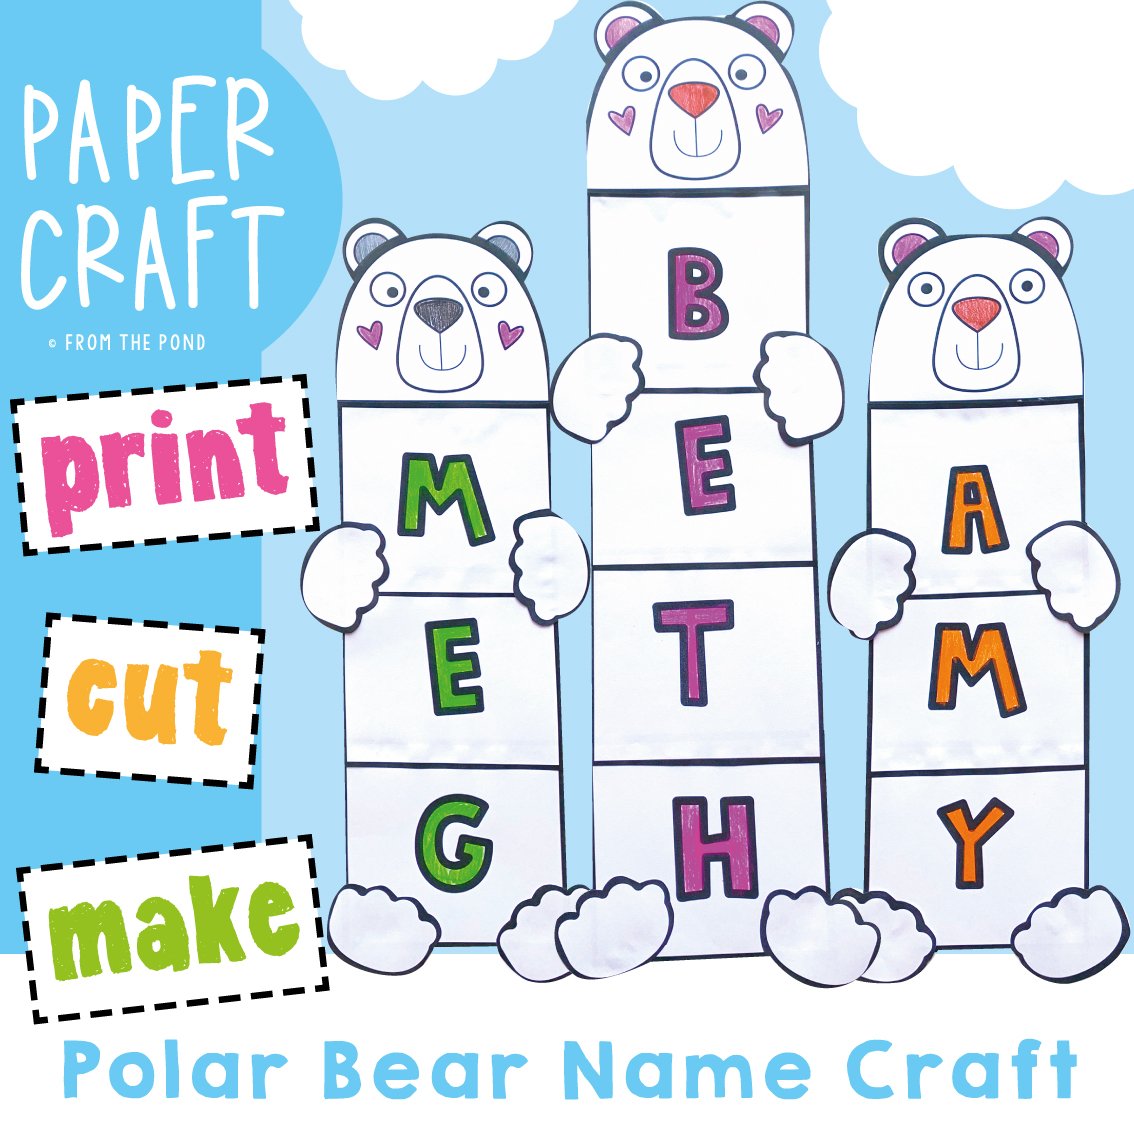 Name Stamps for Card Making + Free Printables - ARTBAR